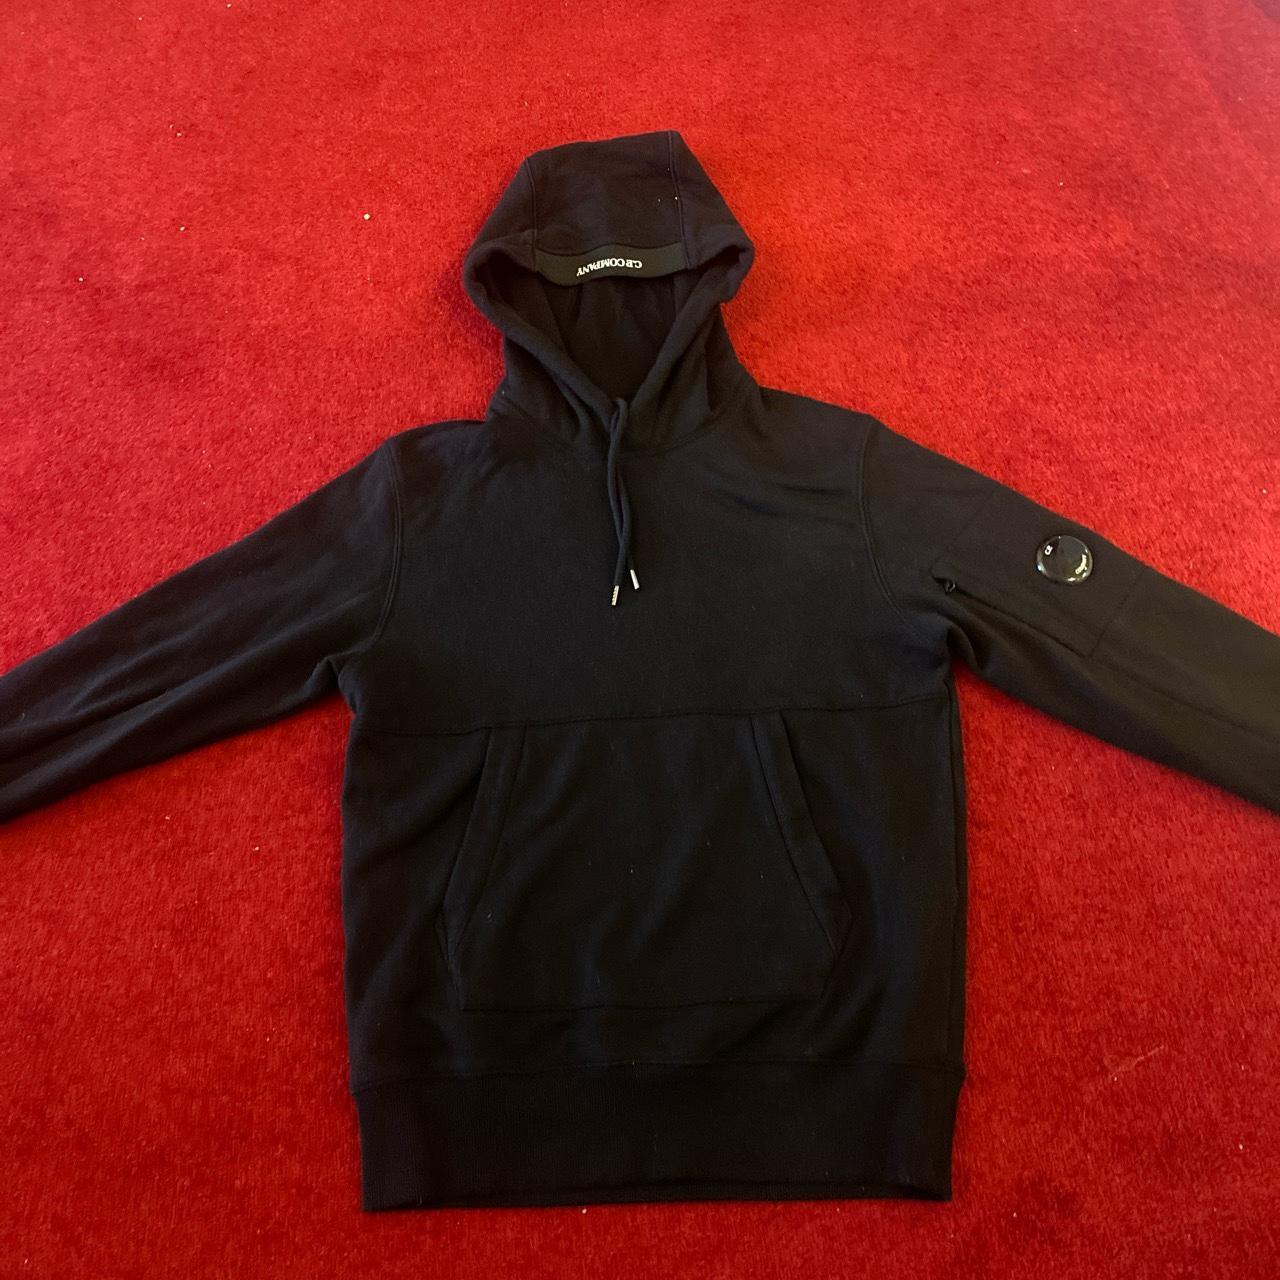 Small black cp jumper, perfect condition after being... - Depop